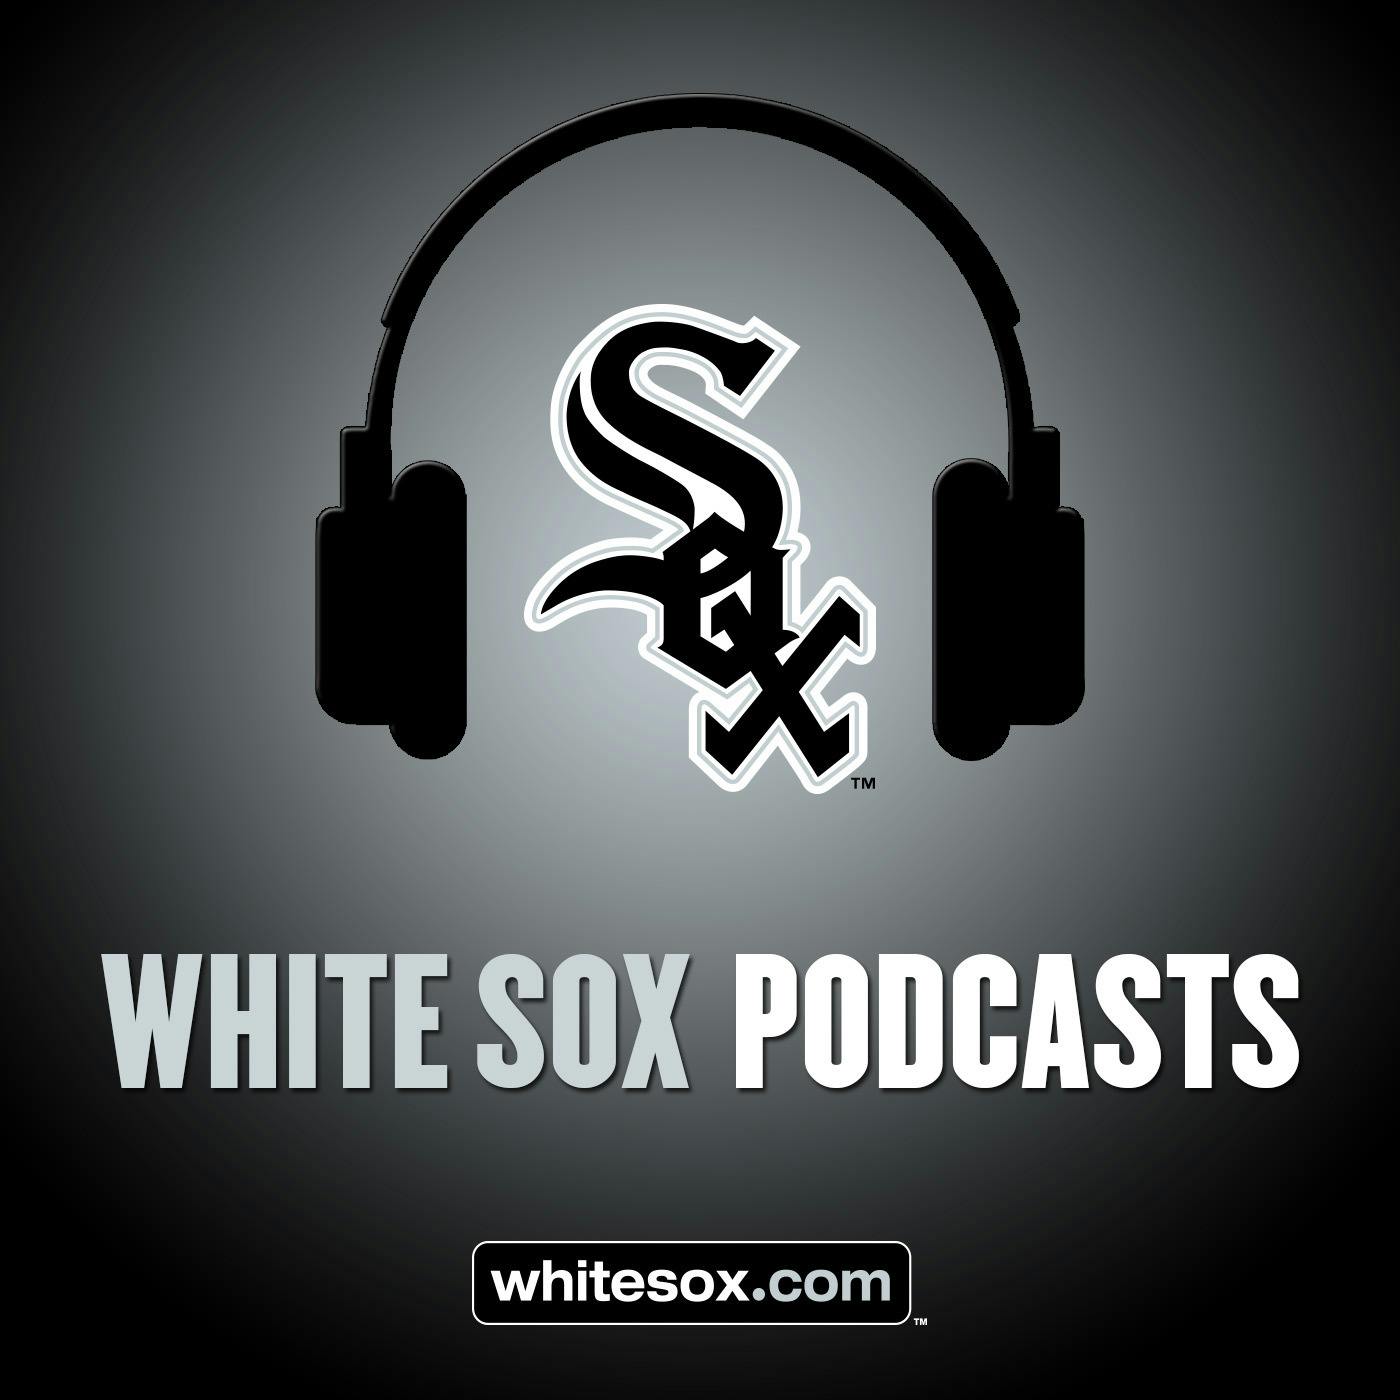 1/11/20: White Sox Weekly